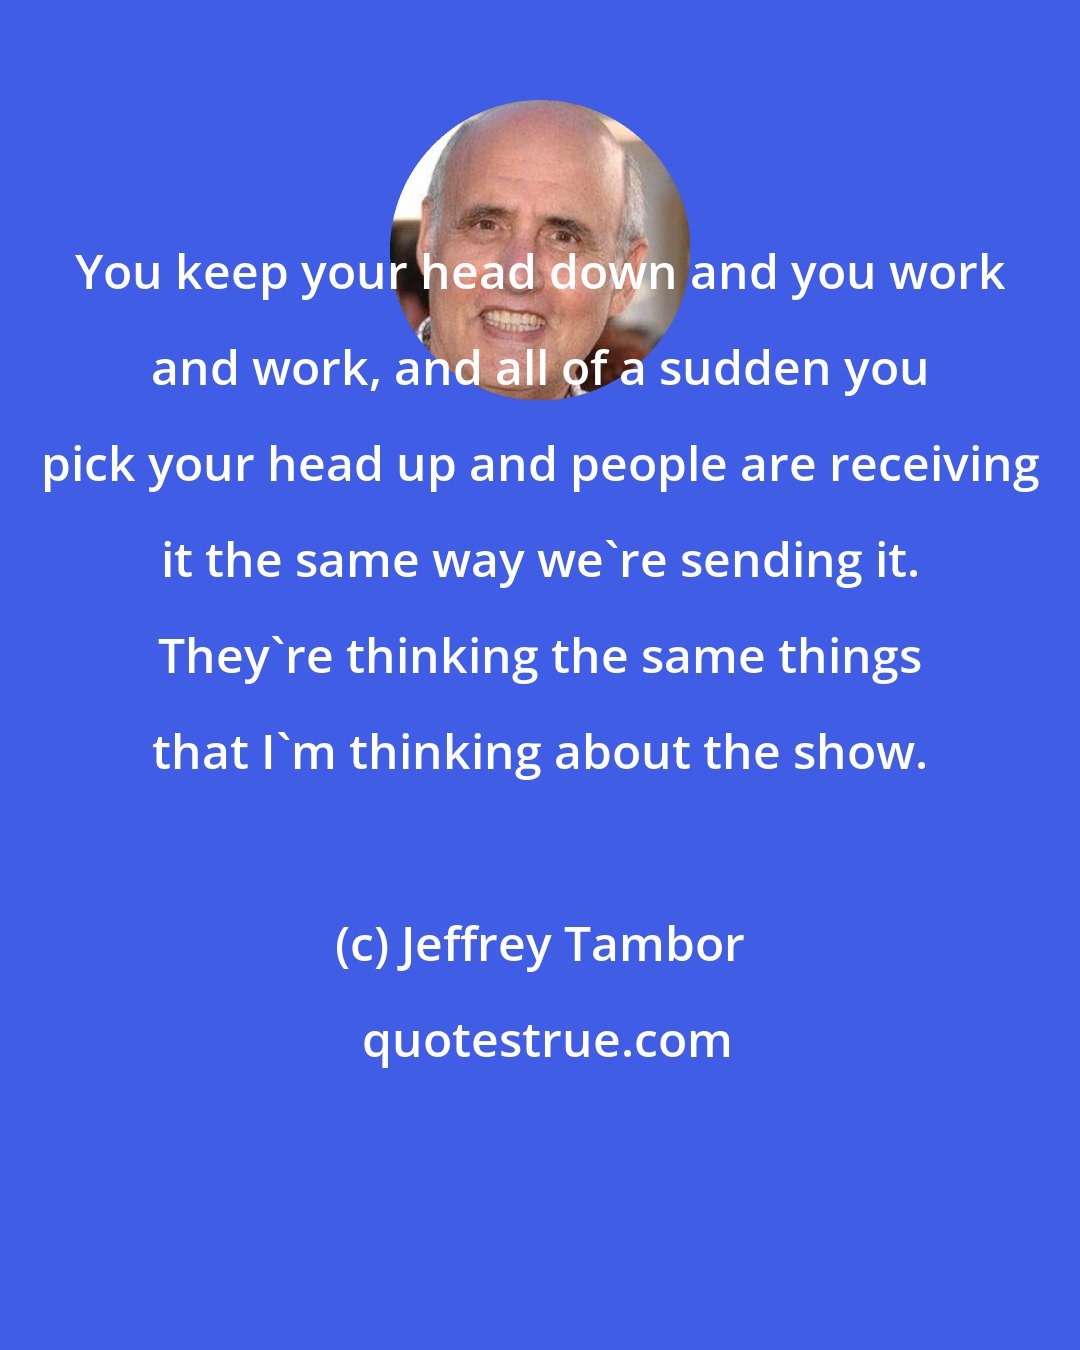 Jeffrey Tambor: You keep your head down and you work and work, and all of a sudden you pick your head up and people are receiving it the same way we're sending it. They're thinking the same things that I'm thinking about the show.